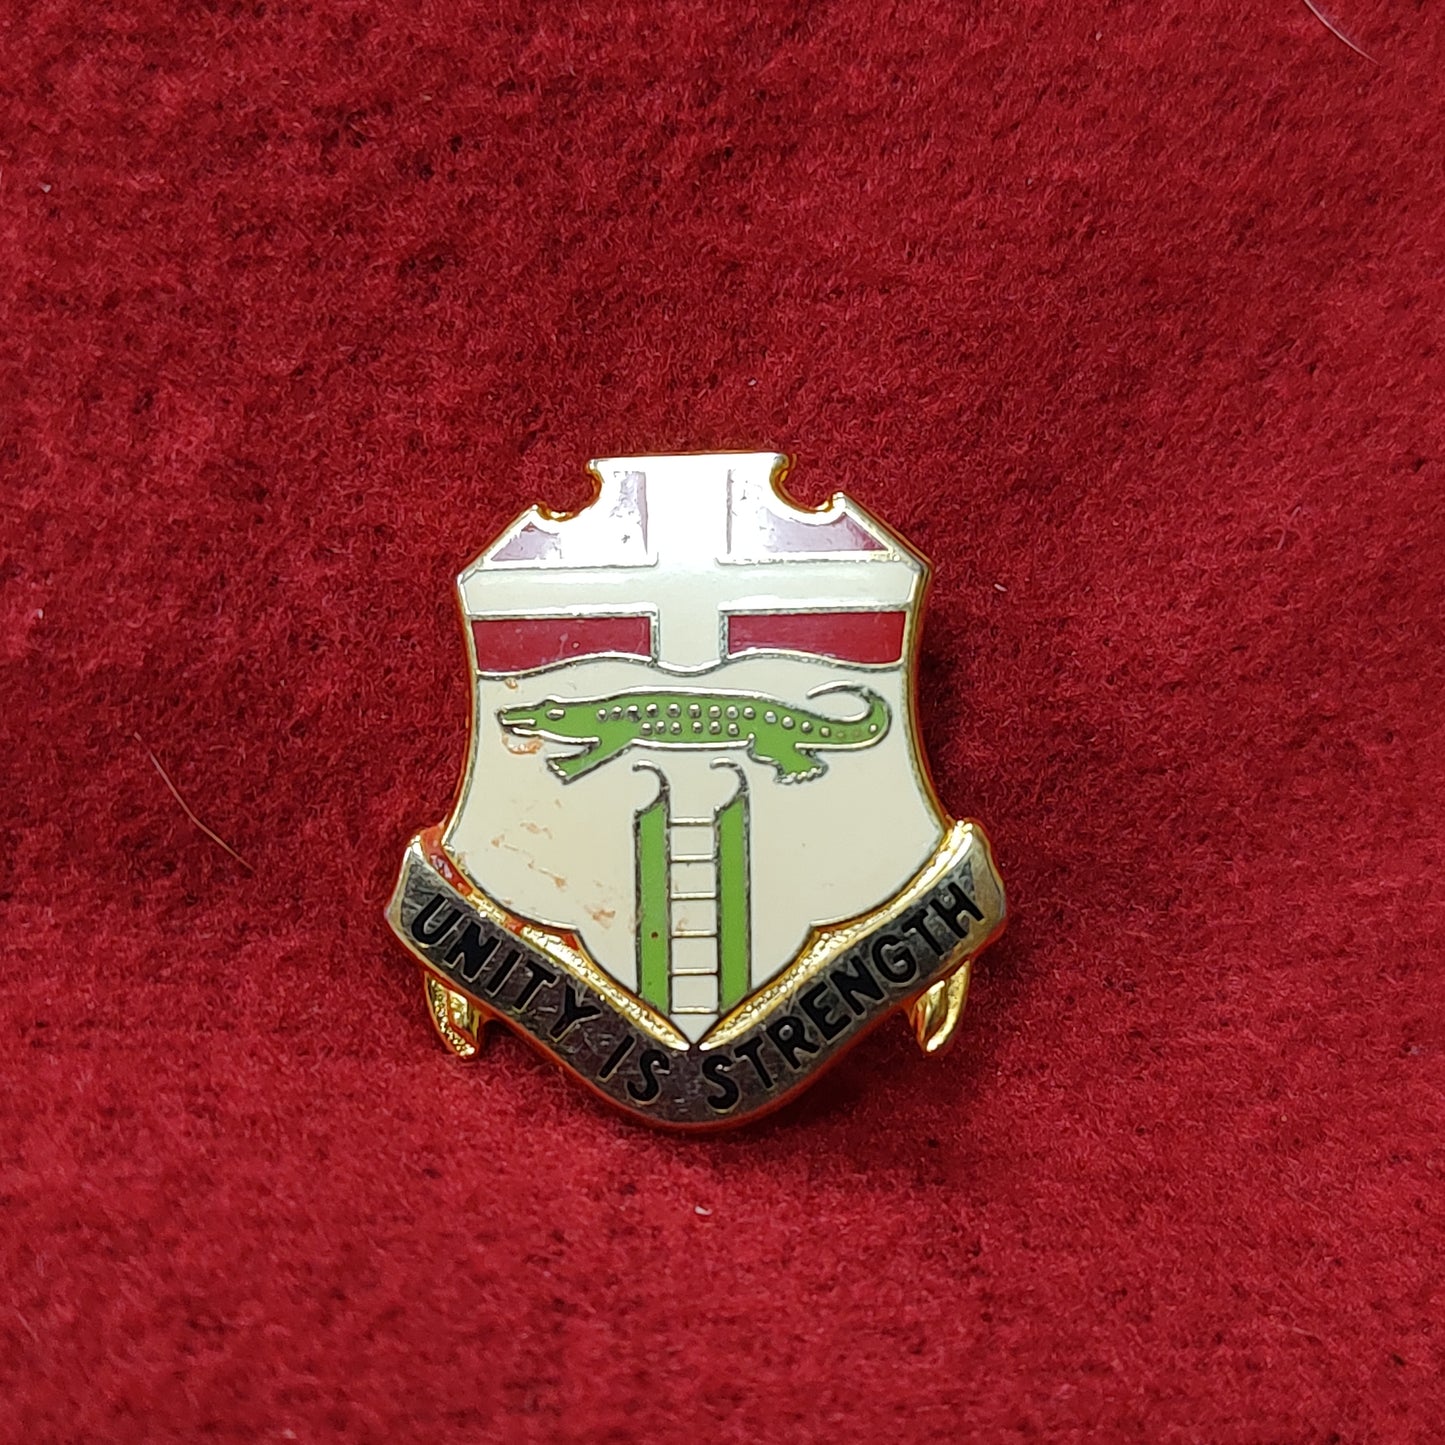 VINTAGE US Army 6th INFANTRY
Unit Crest Pin (11o151)